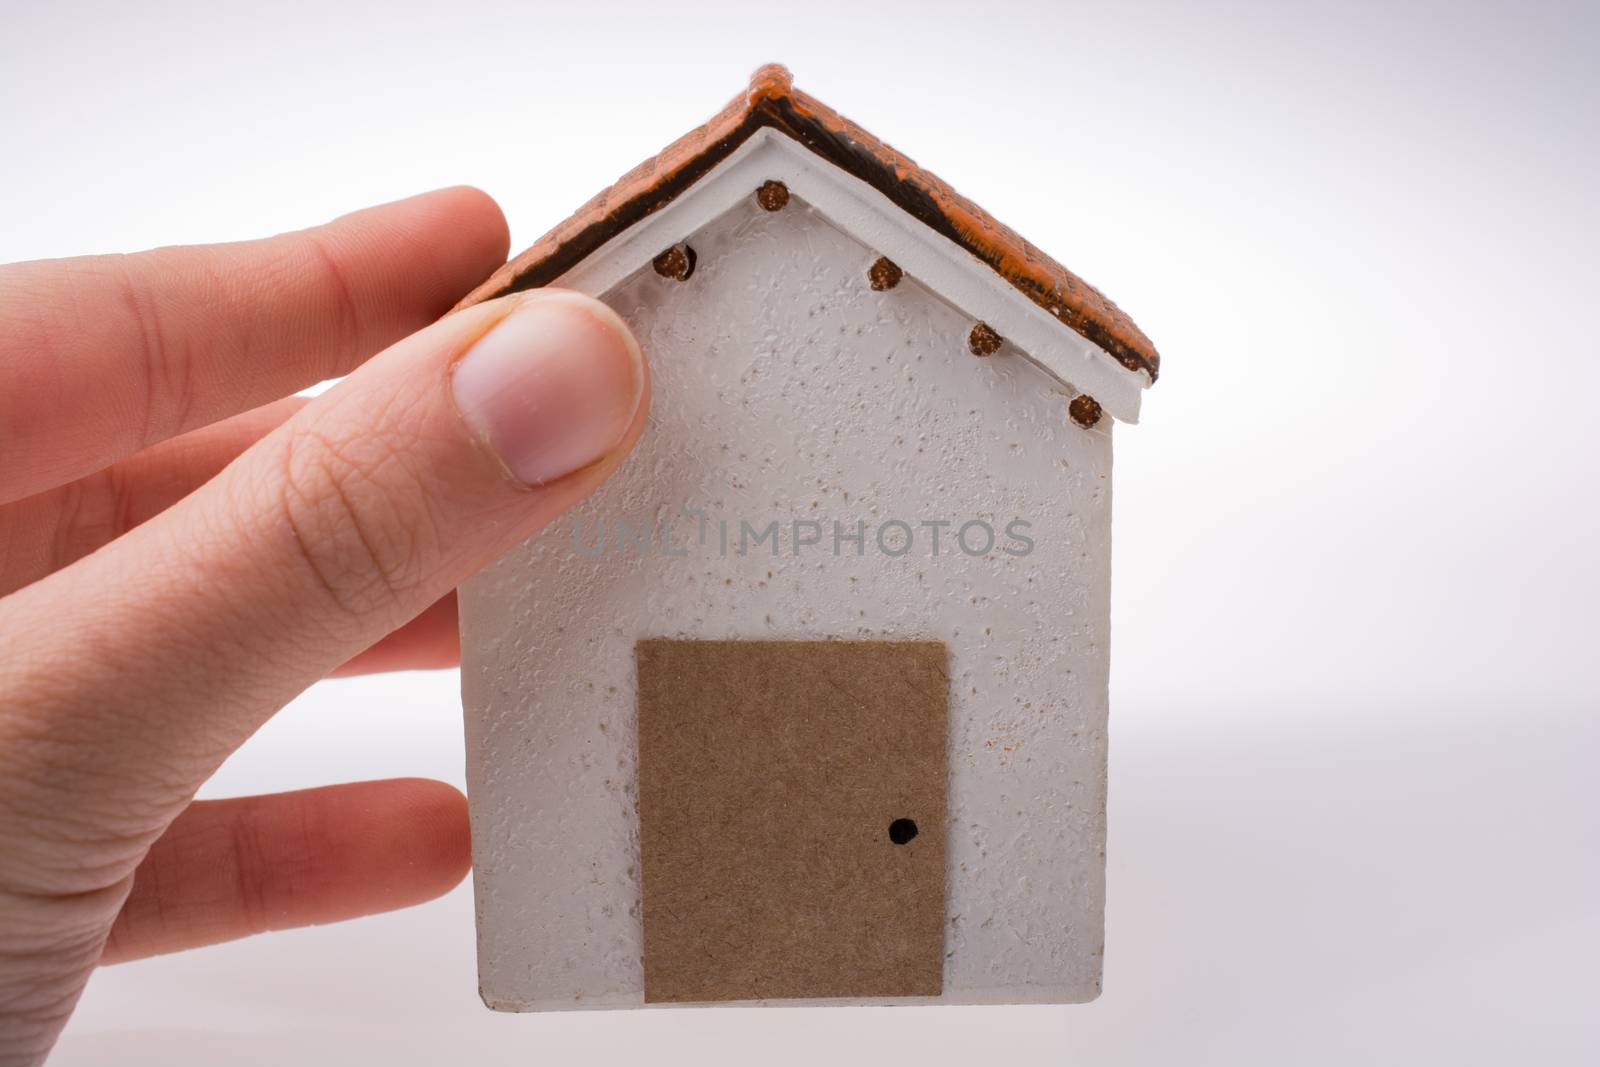 Little model house on a white background